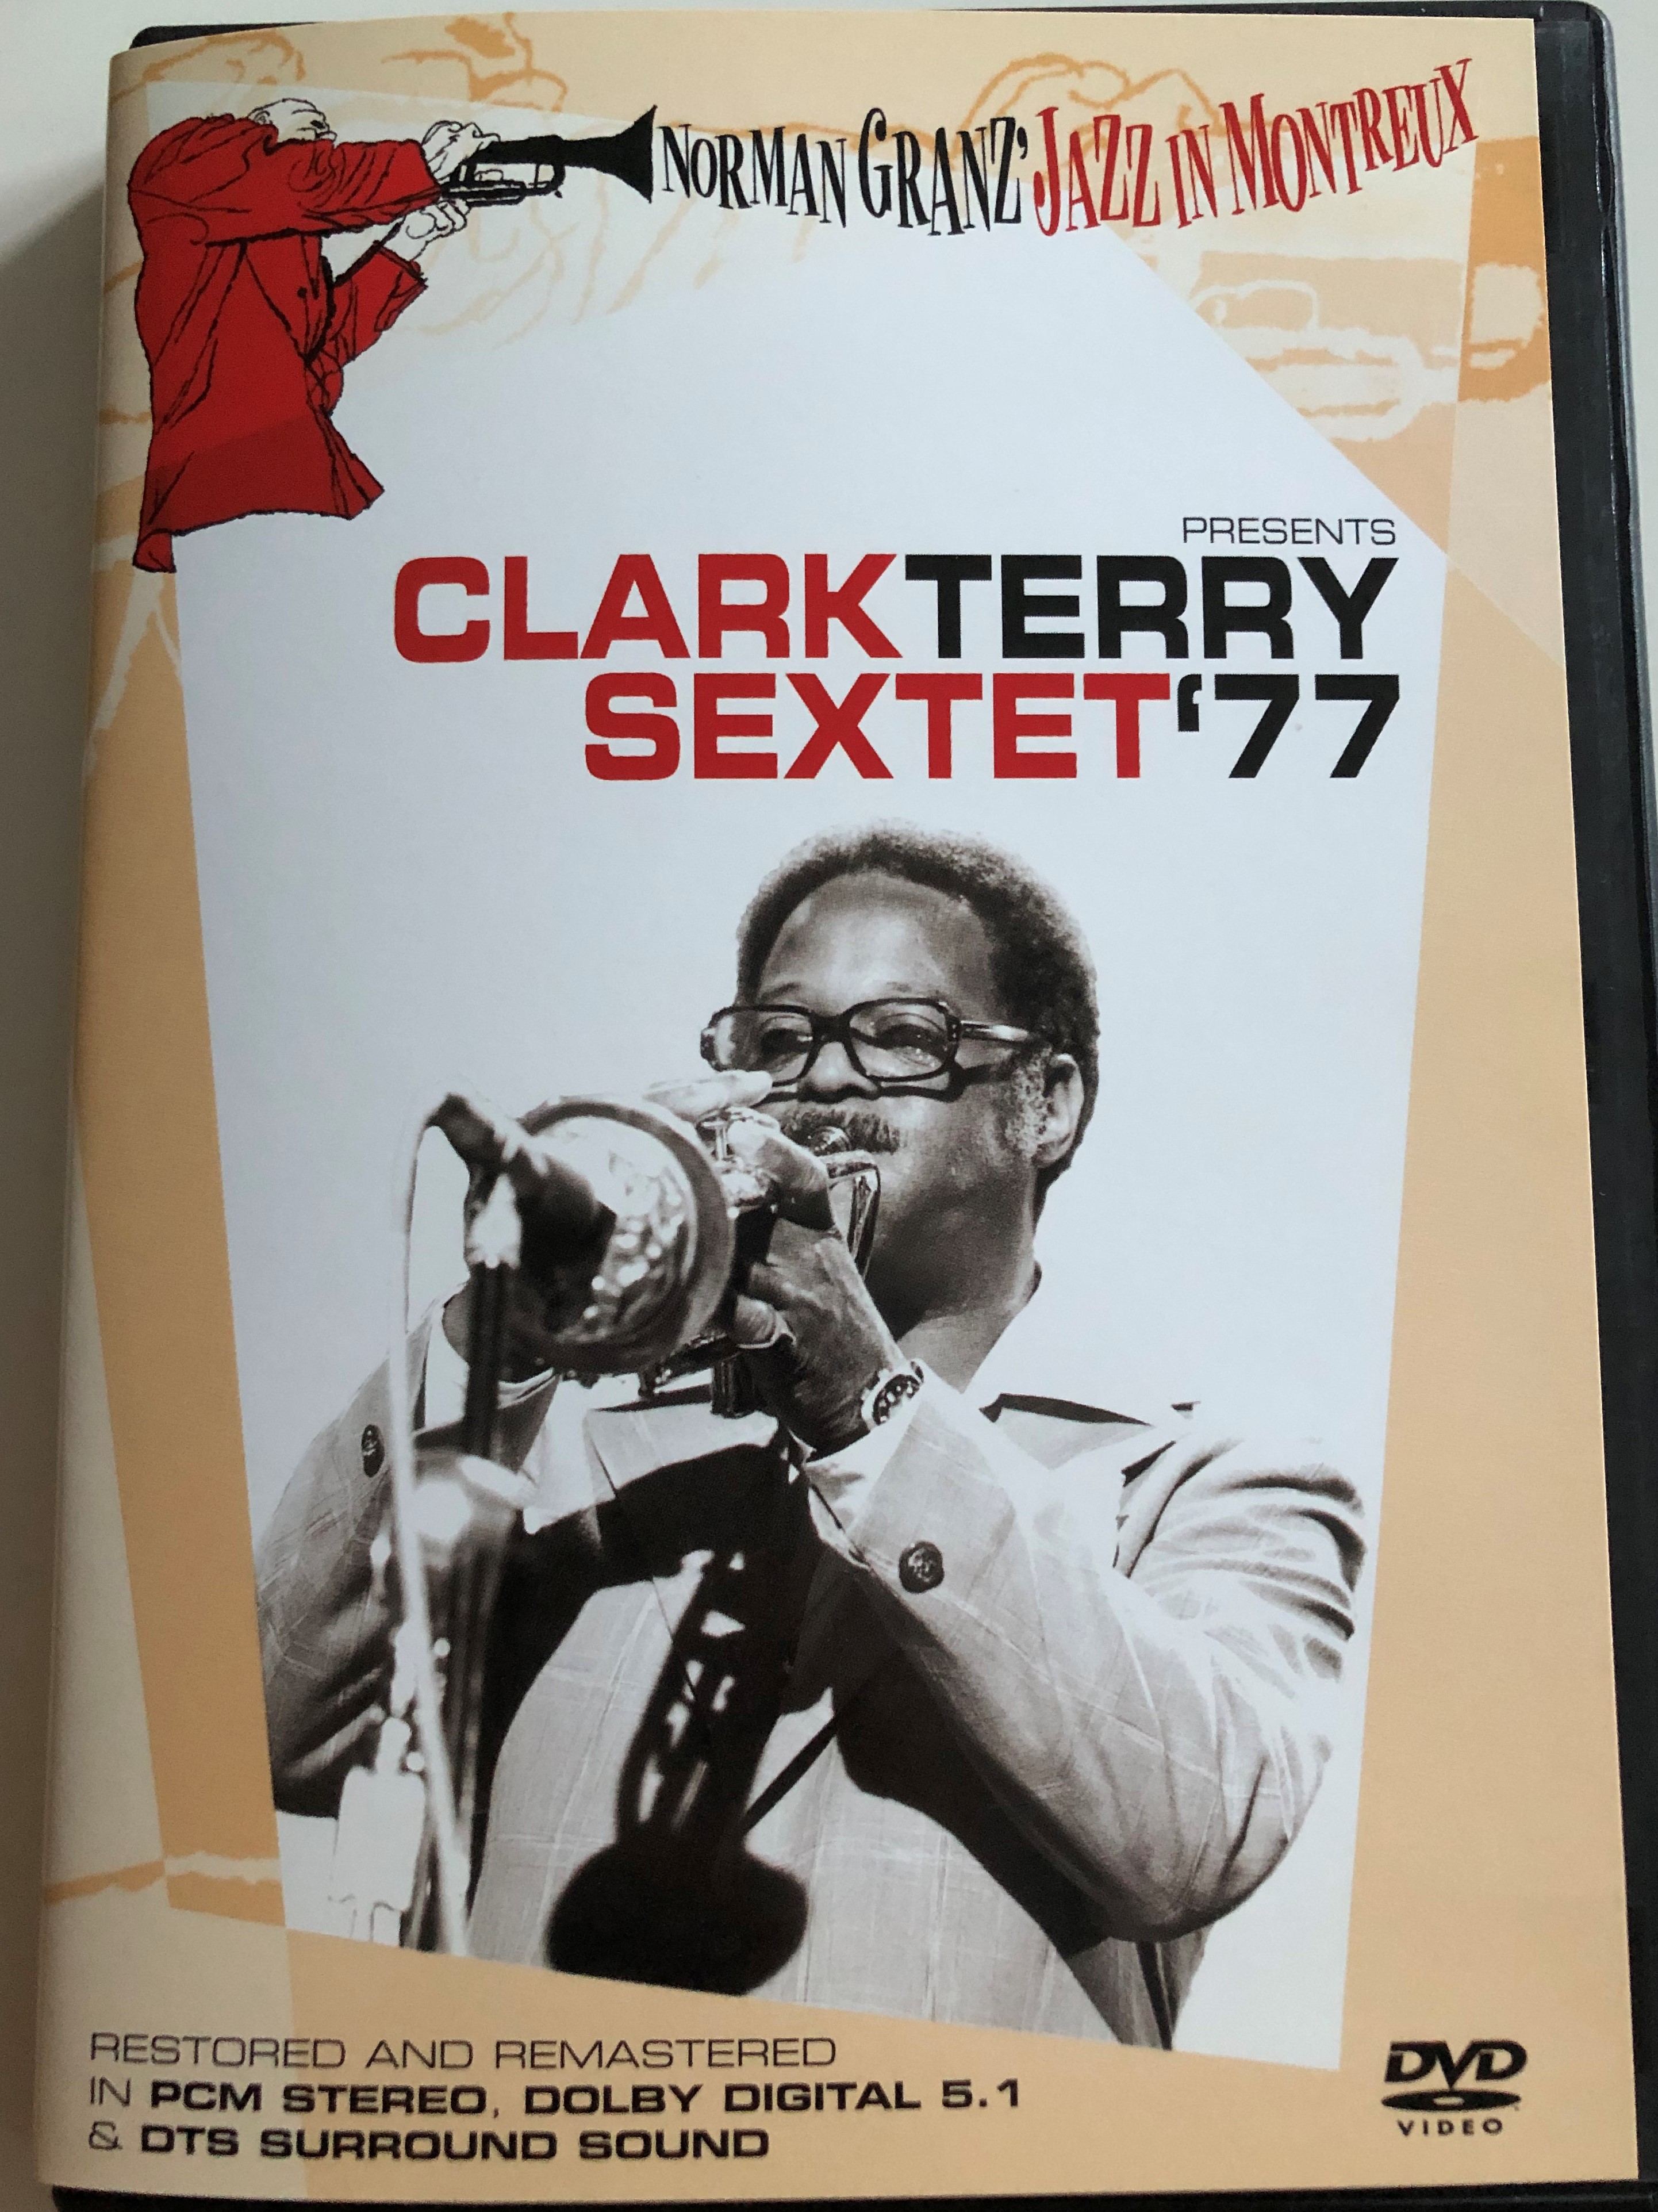 Clark Terry Sextet '77 DVD 2005 / Norman Granz' Jazz in Montreux / Minor  Blues, Pennies From Heaven, Sama de Orfeu, God bless the child / Restored  and Remastered in Dolby Digital